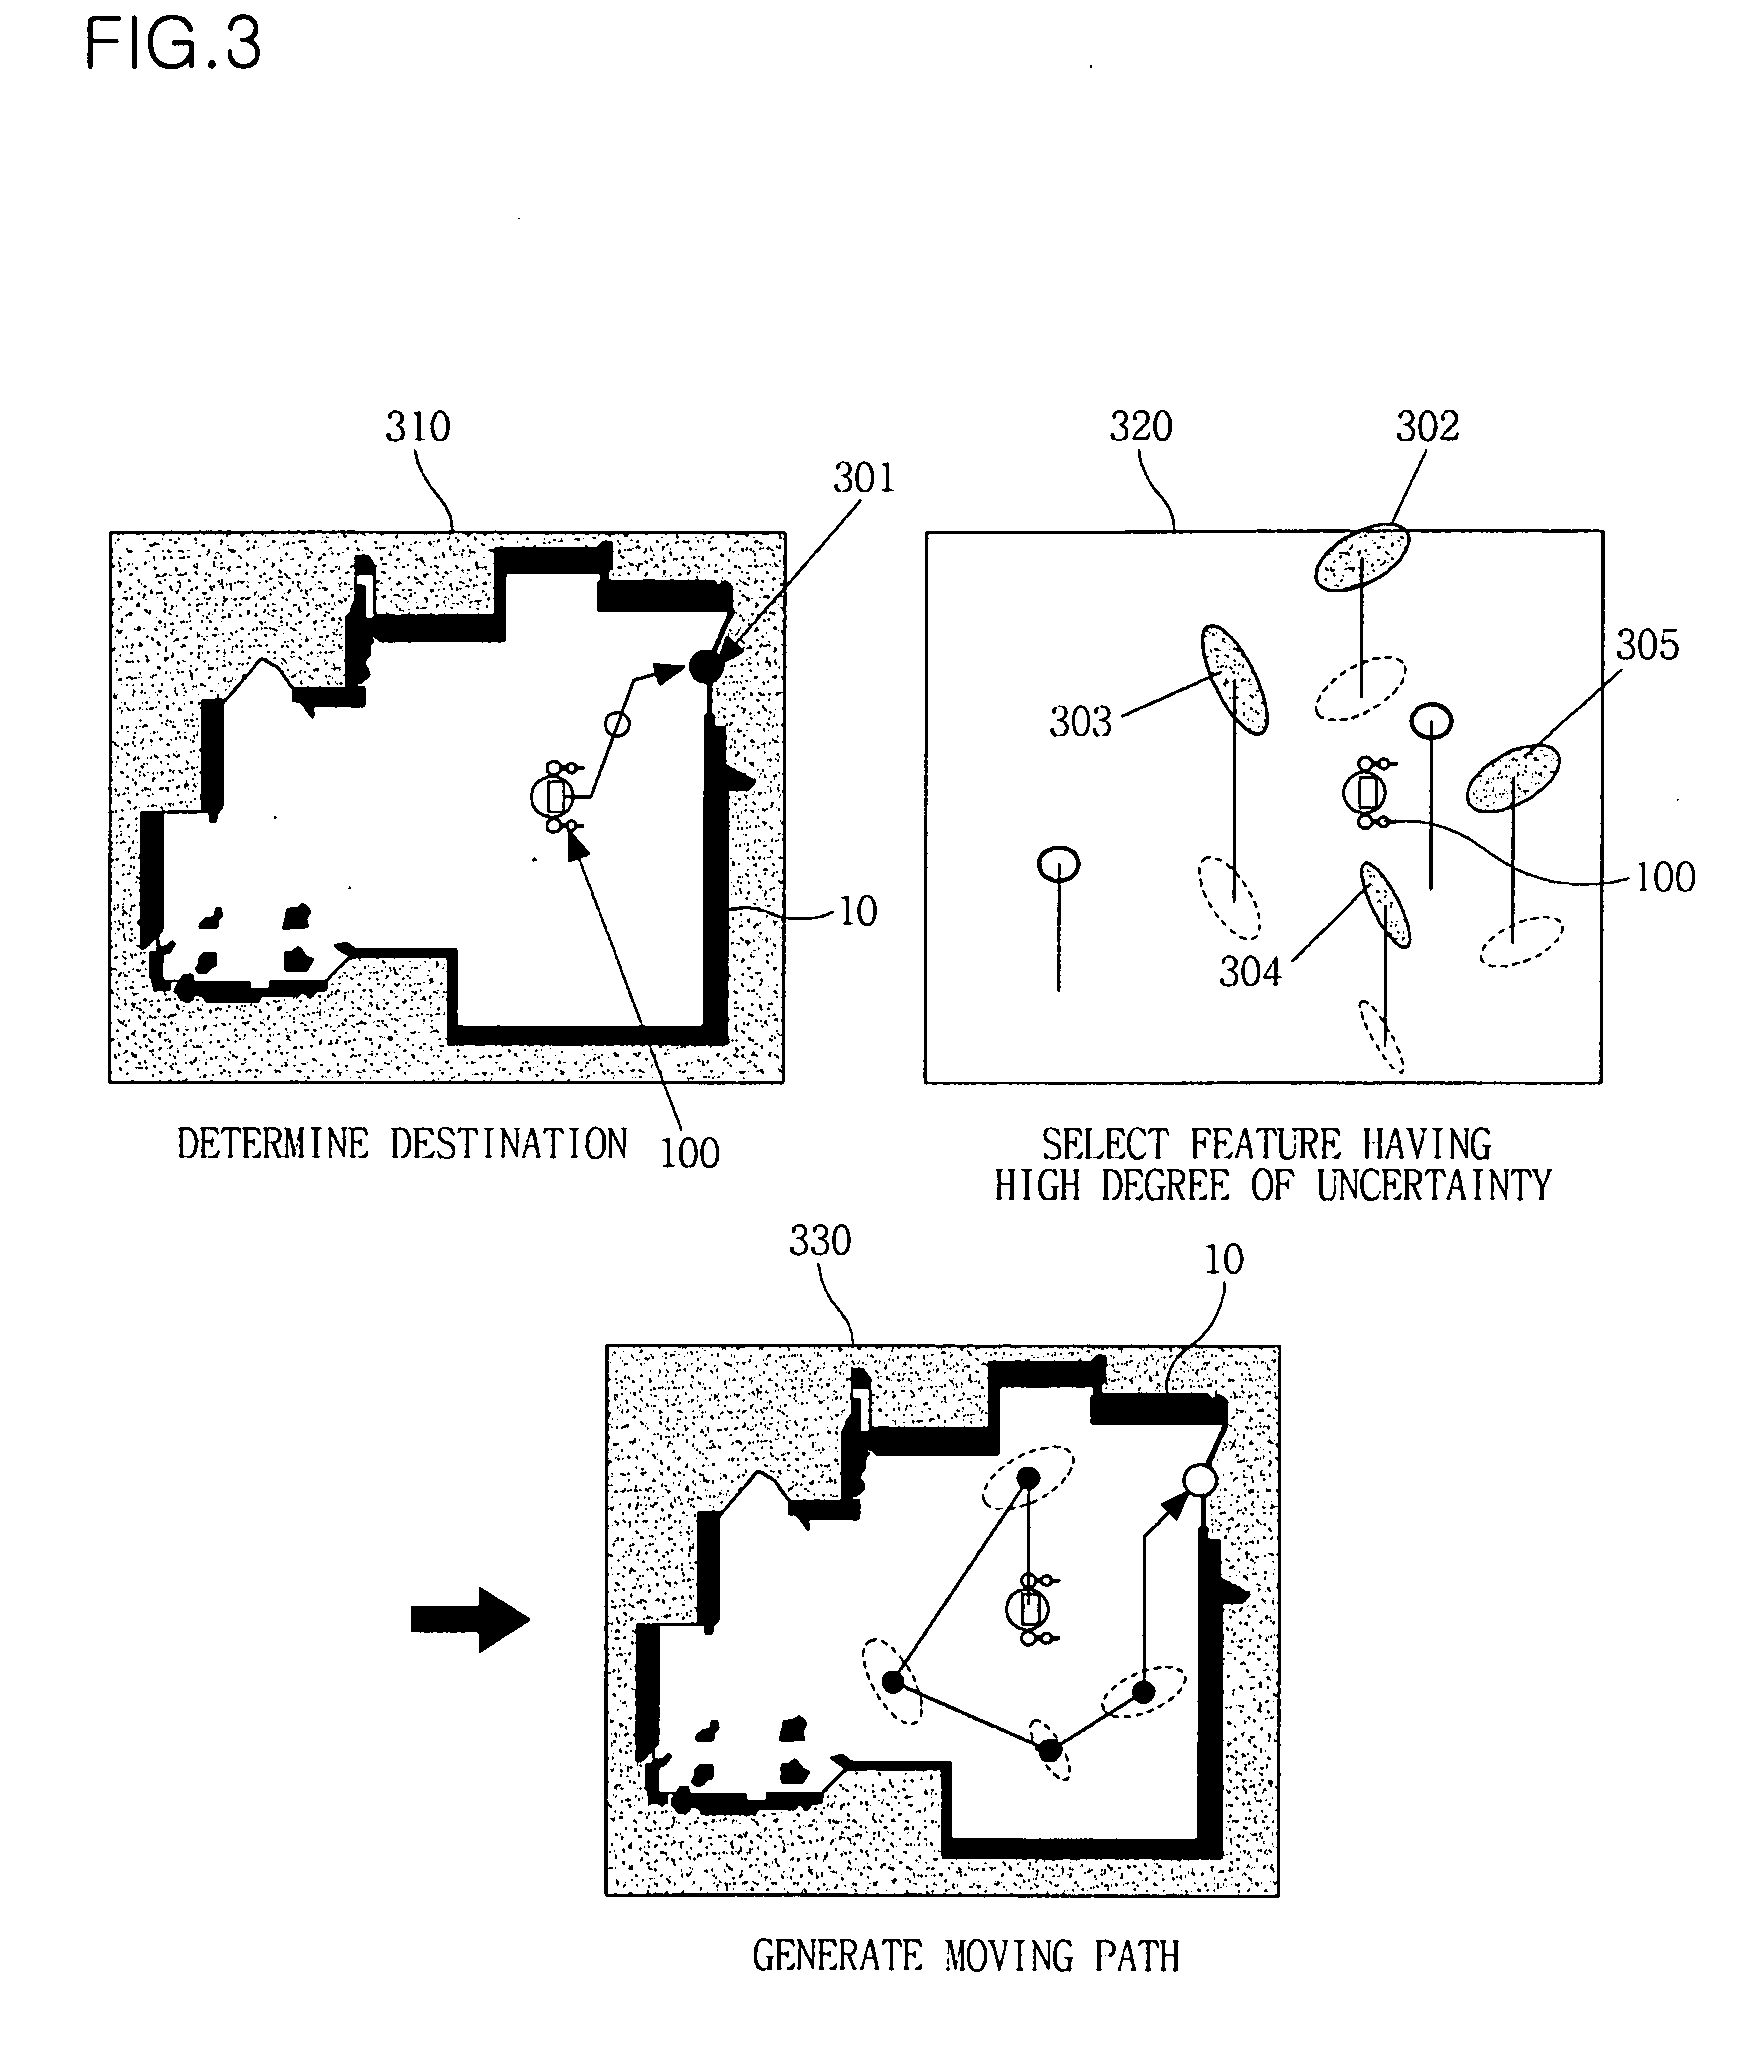 Apparatus and method for building map